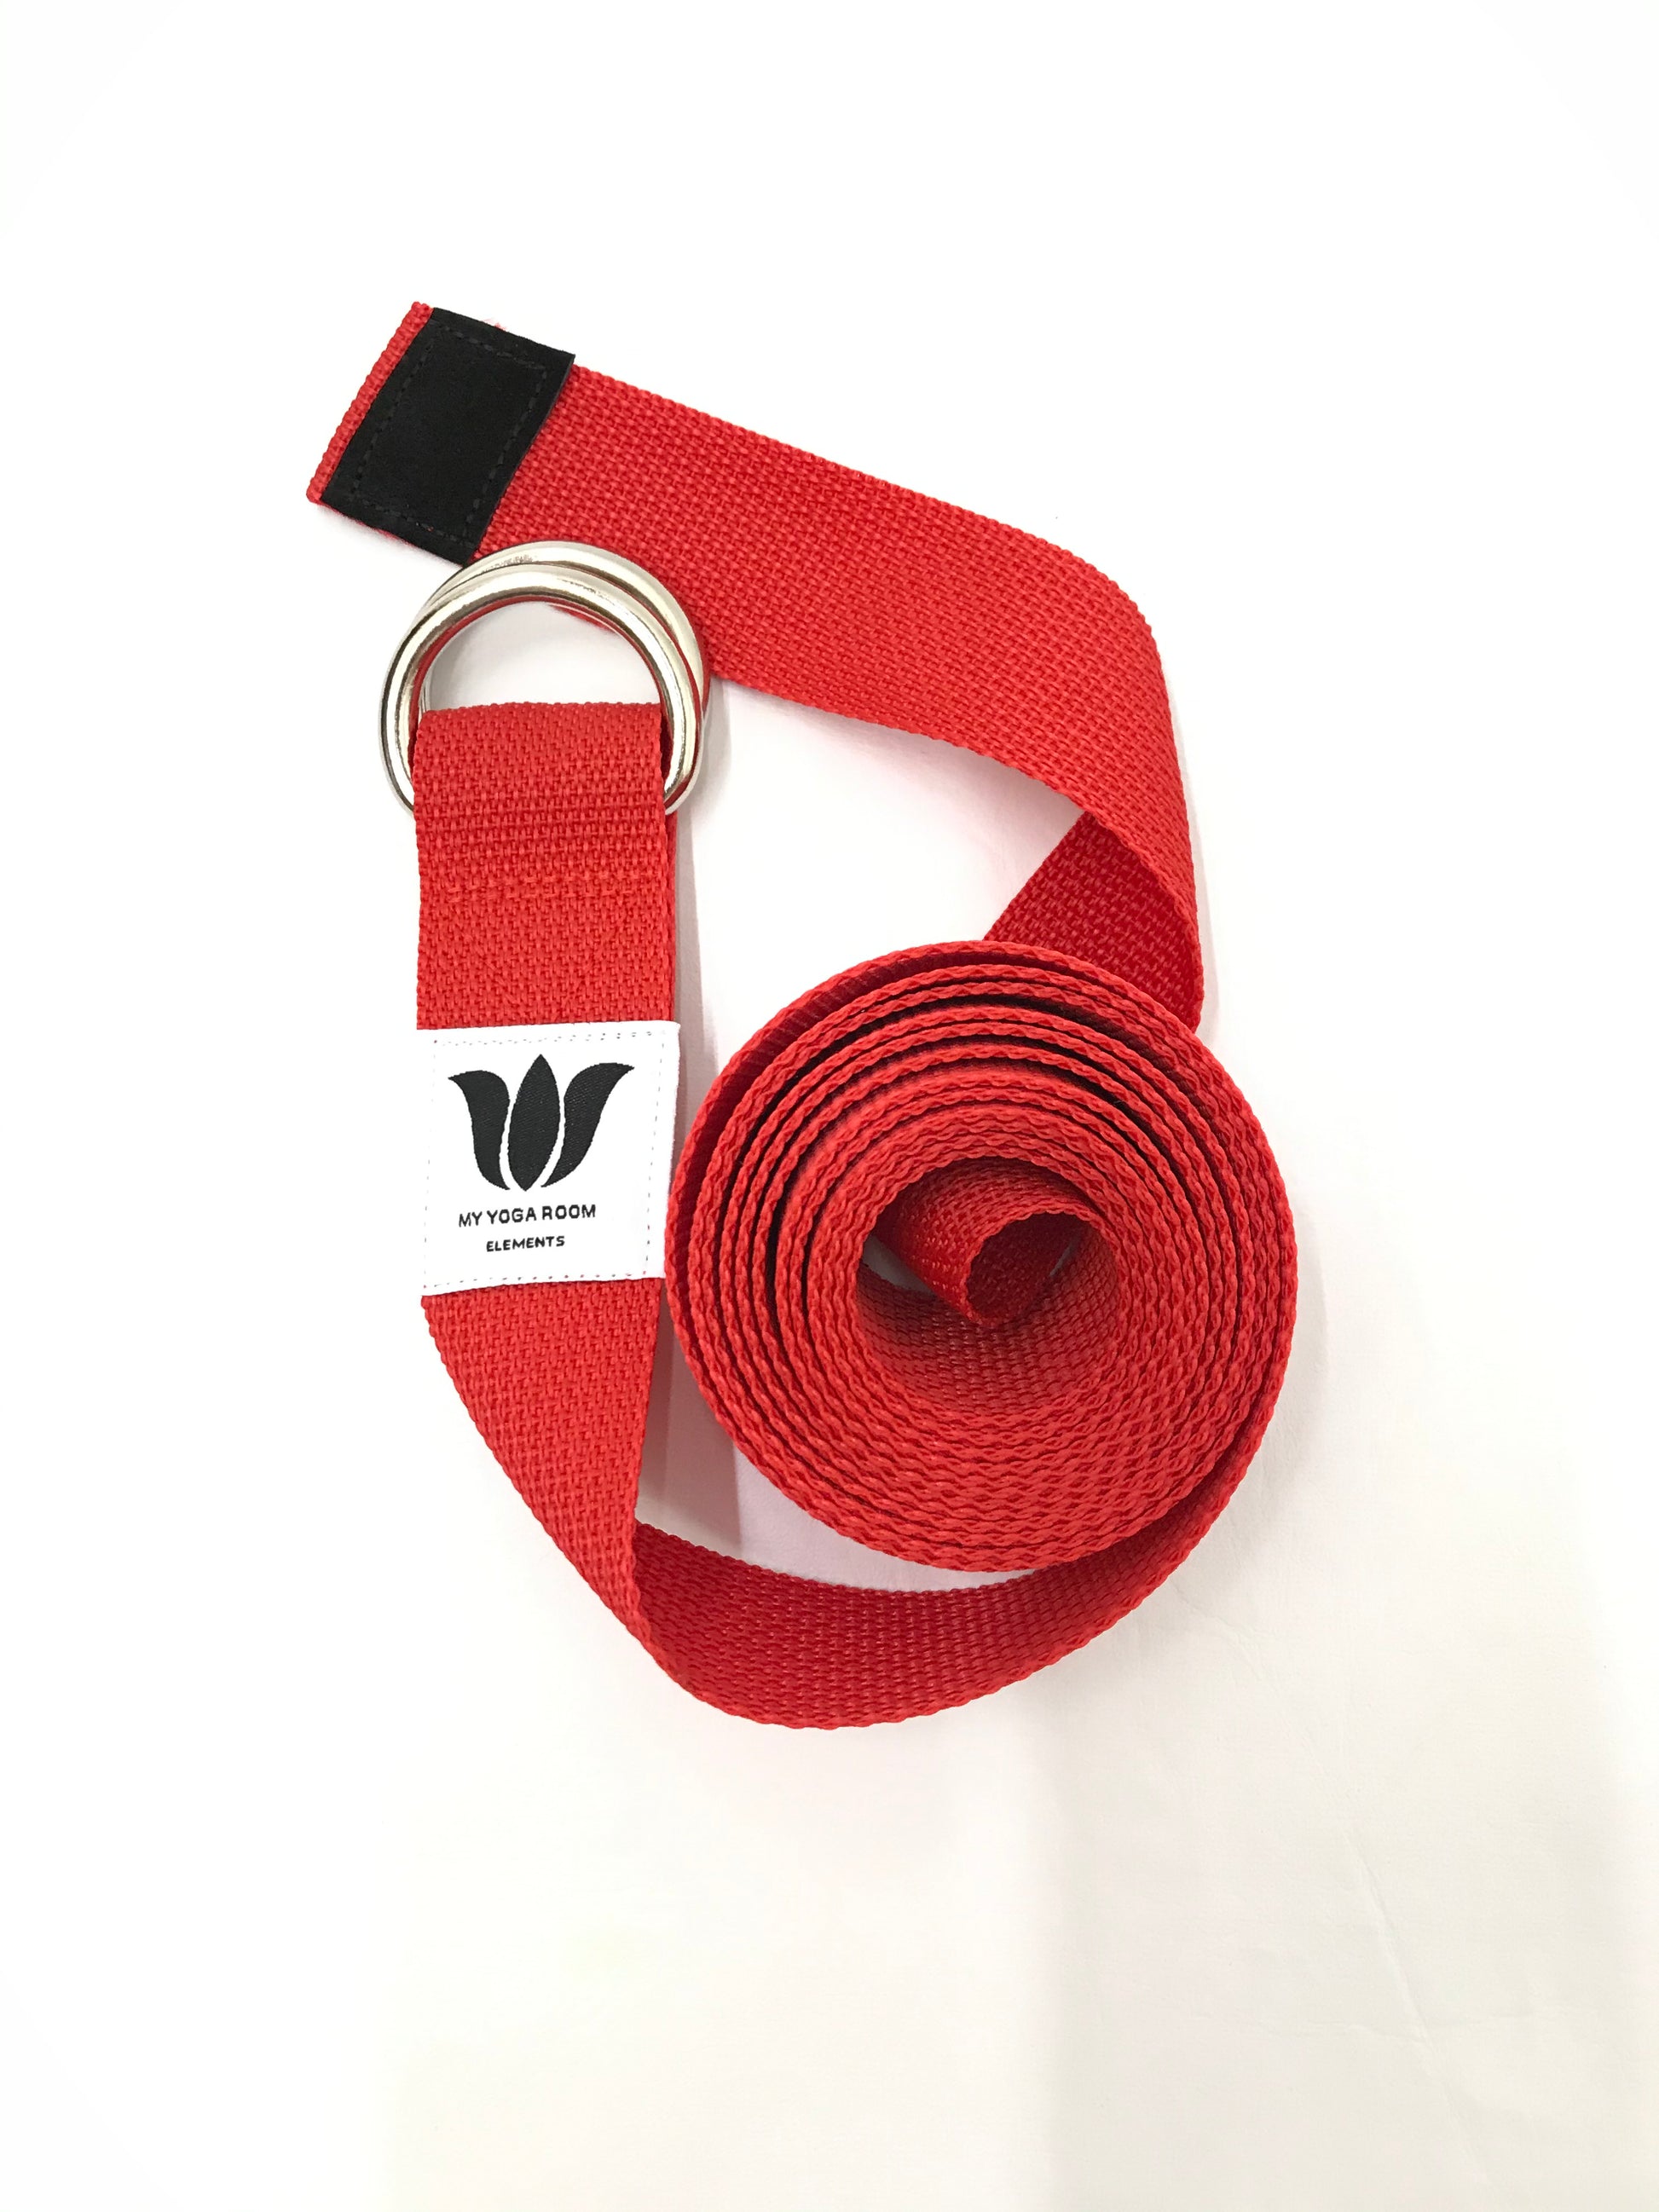 Yoga Strap, Canadian Made Yoga Prop, Red Webbing with D rings, Support your yoga poses whether a beginner or advanced practitioner.